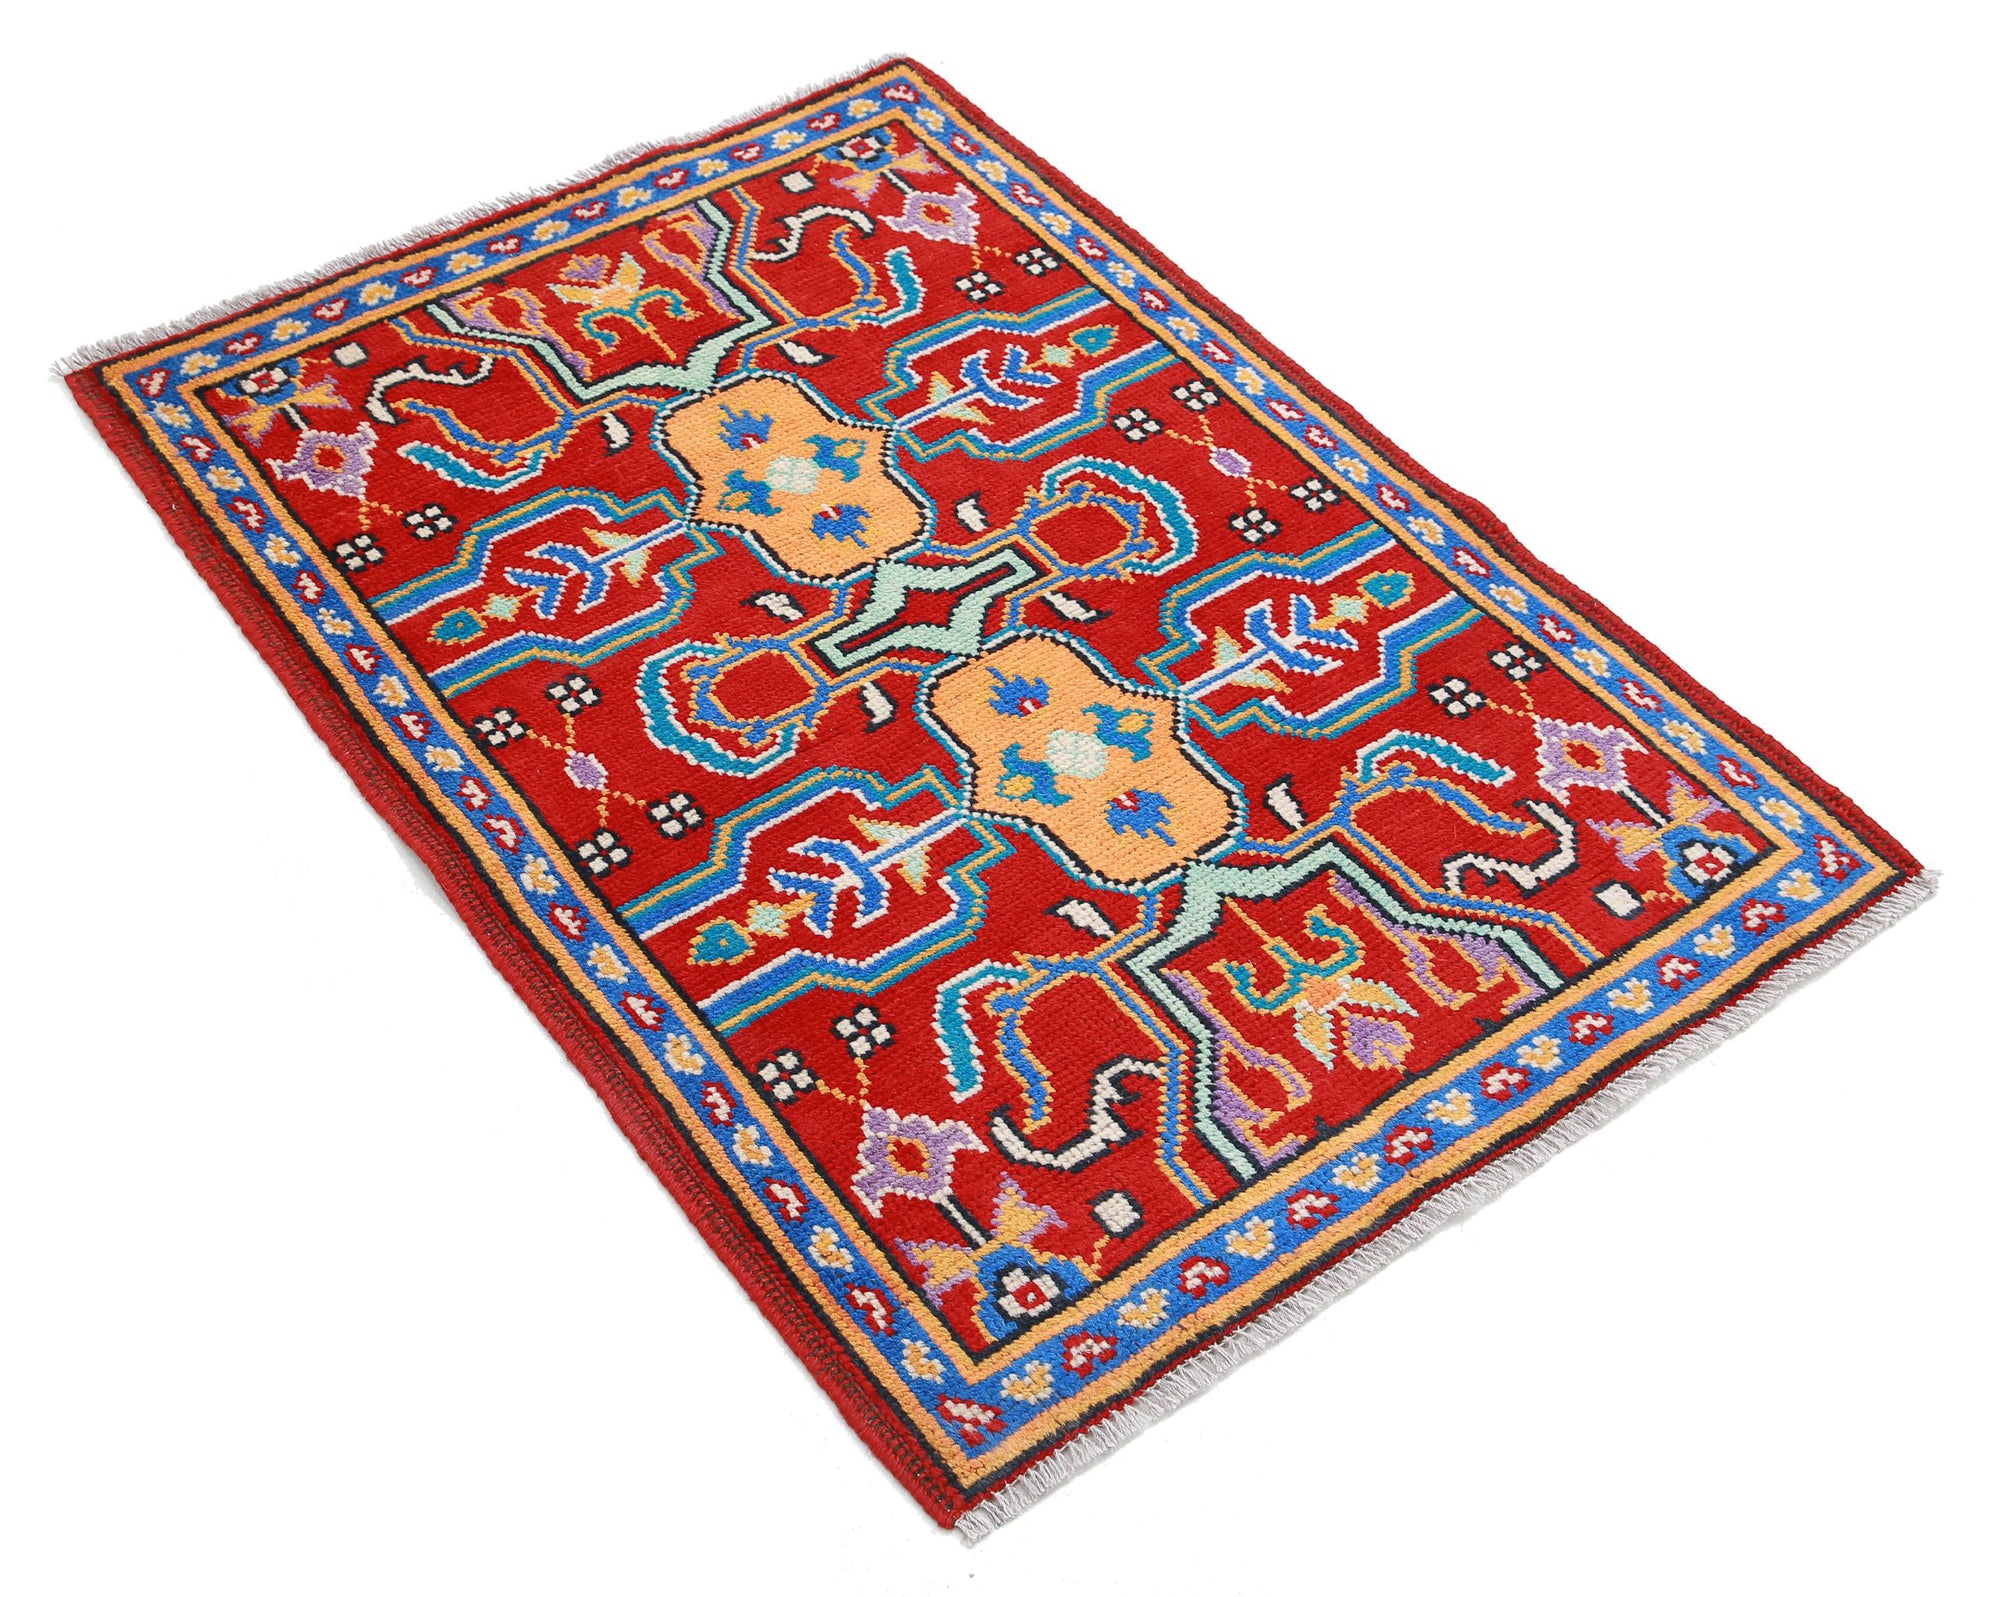 Revival-hand-knotted-qarghani-wool-rug-5014192-1.jpg